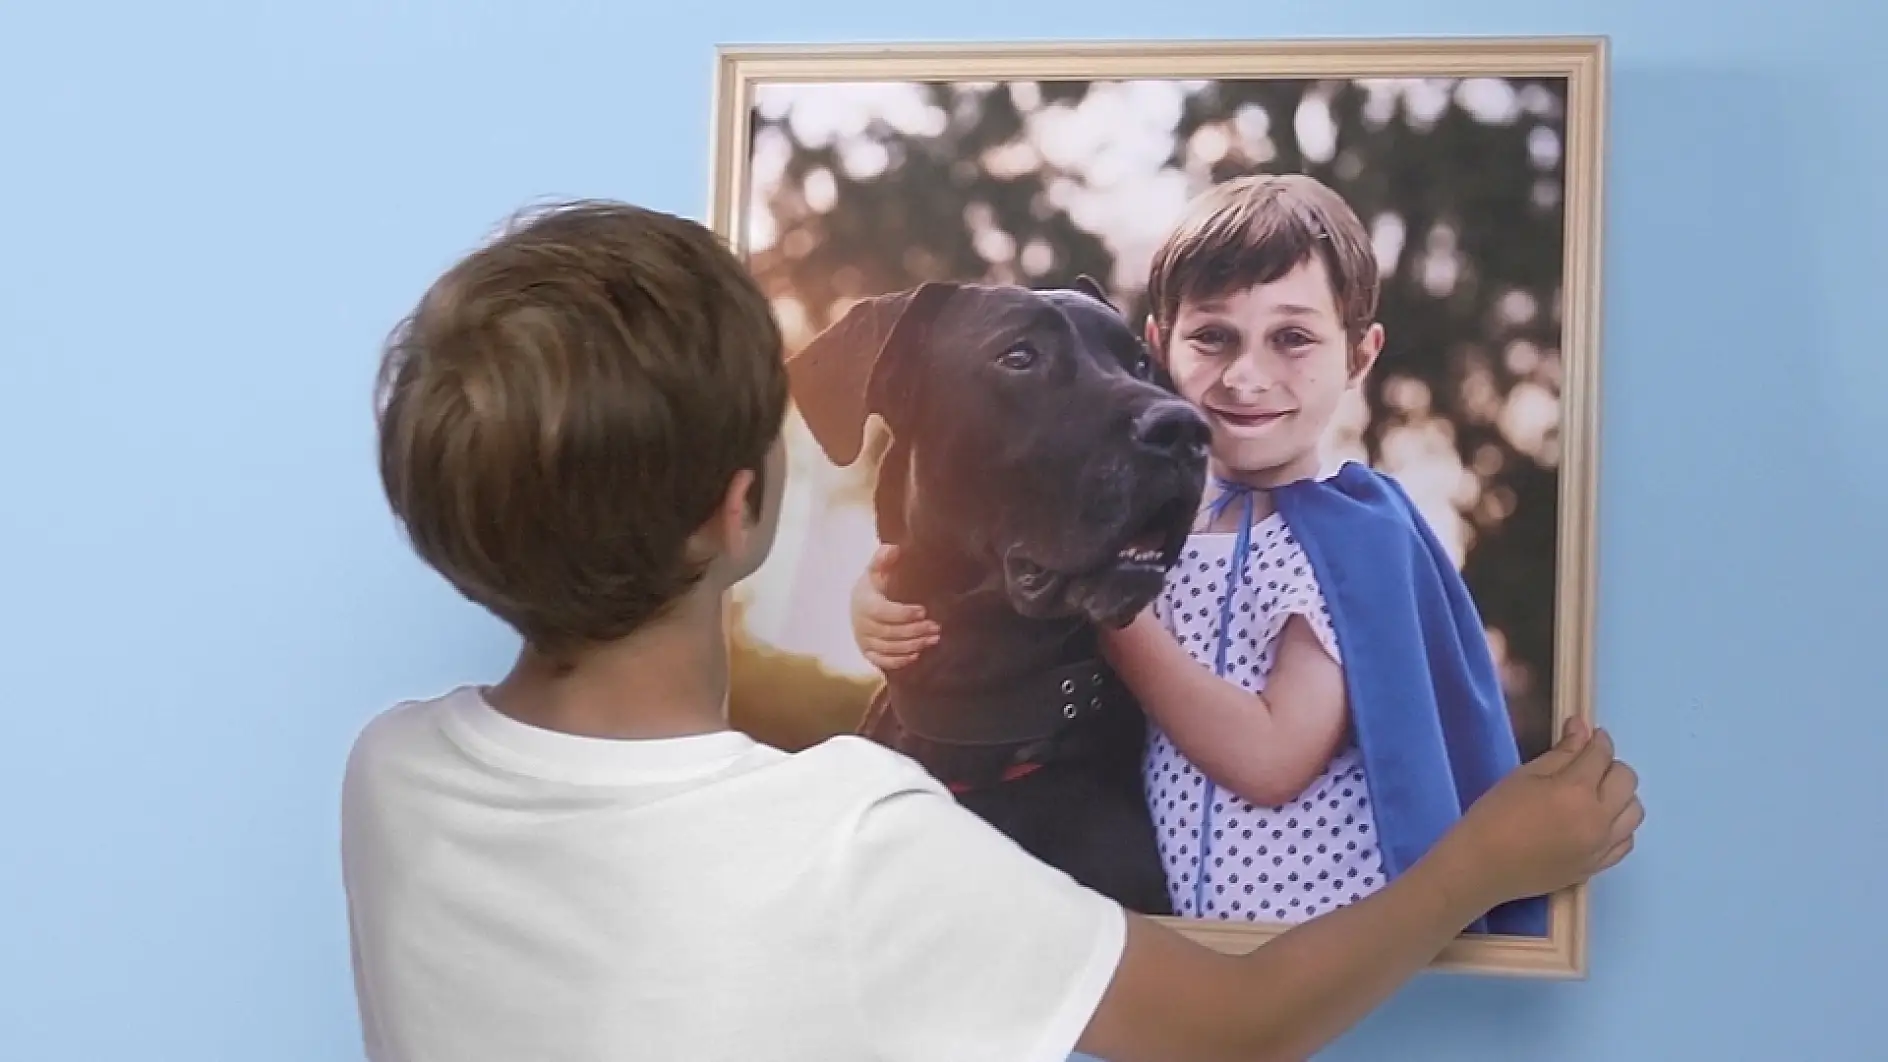 A boy looking at a picture of himself and his dog.